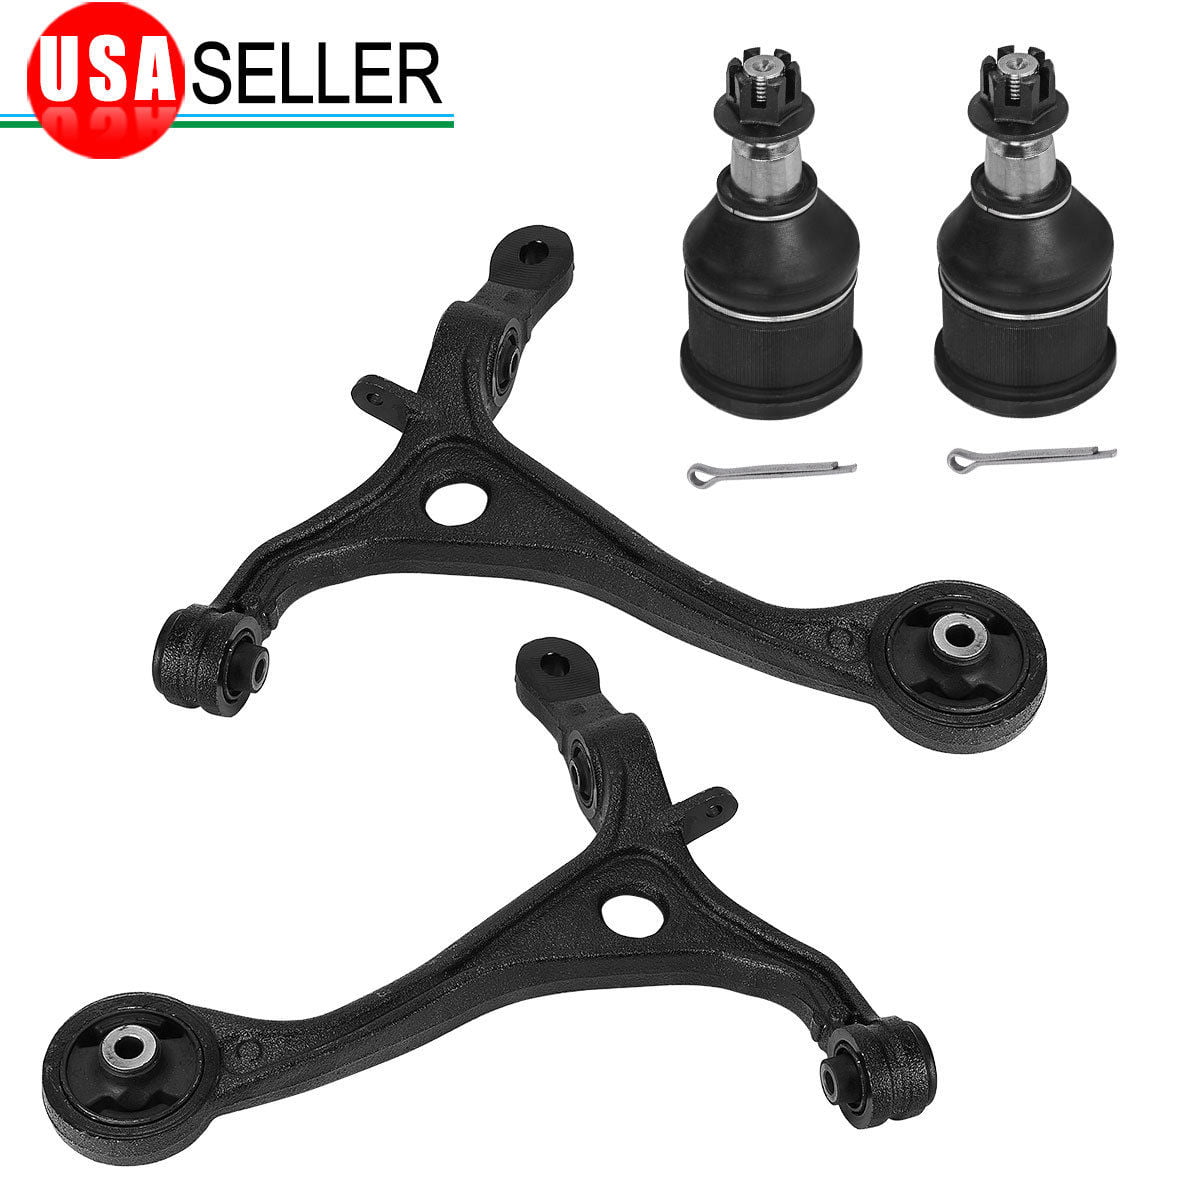 Set of 2 Front Lower Control Arm Fit Acura TSX 2008-04 Honda Accord 2007-03 